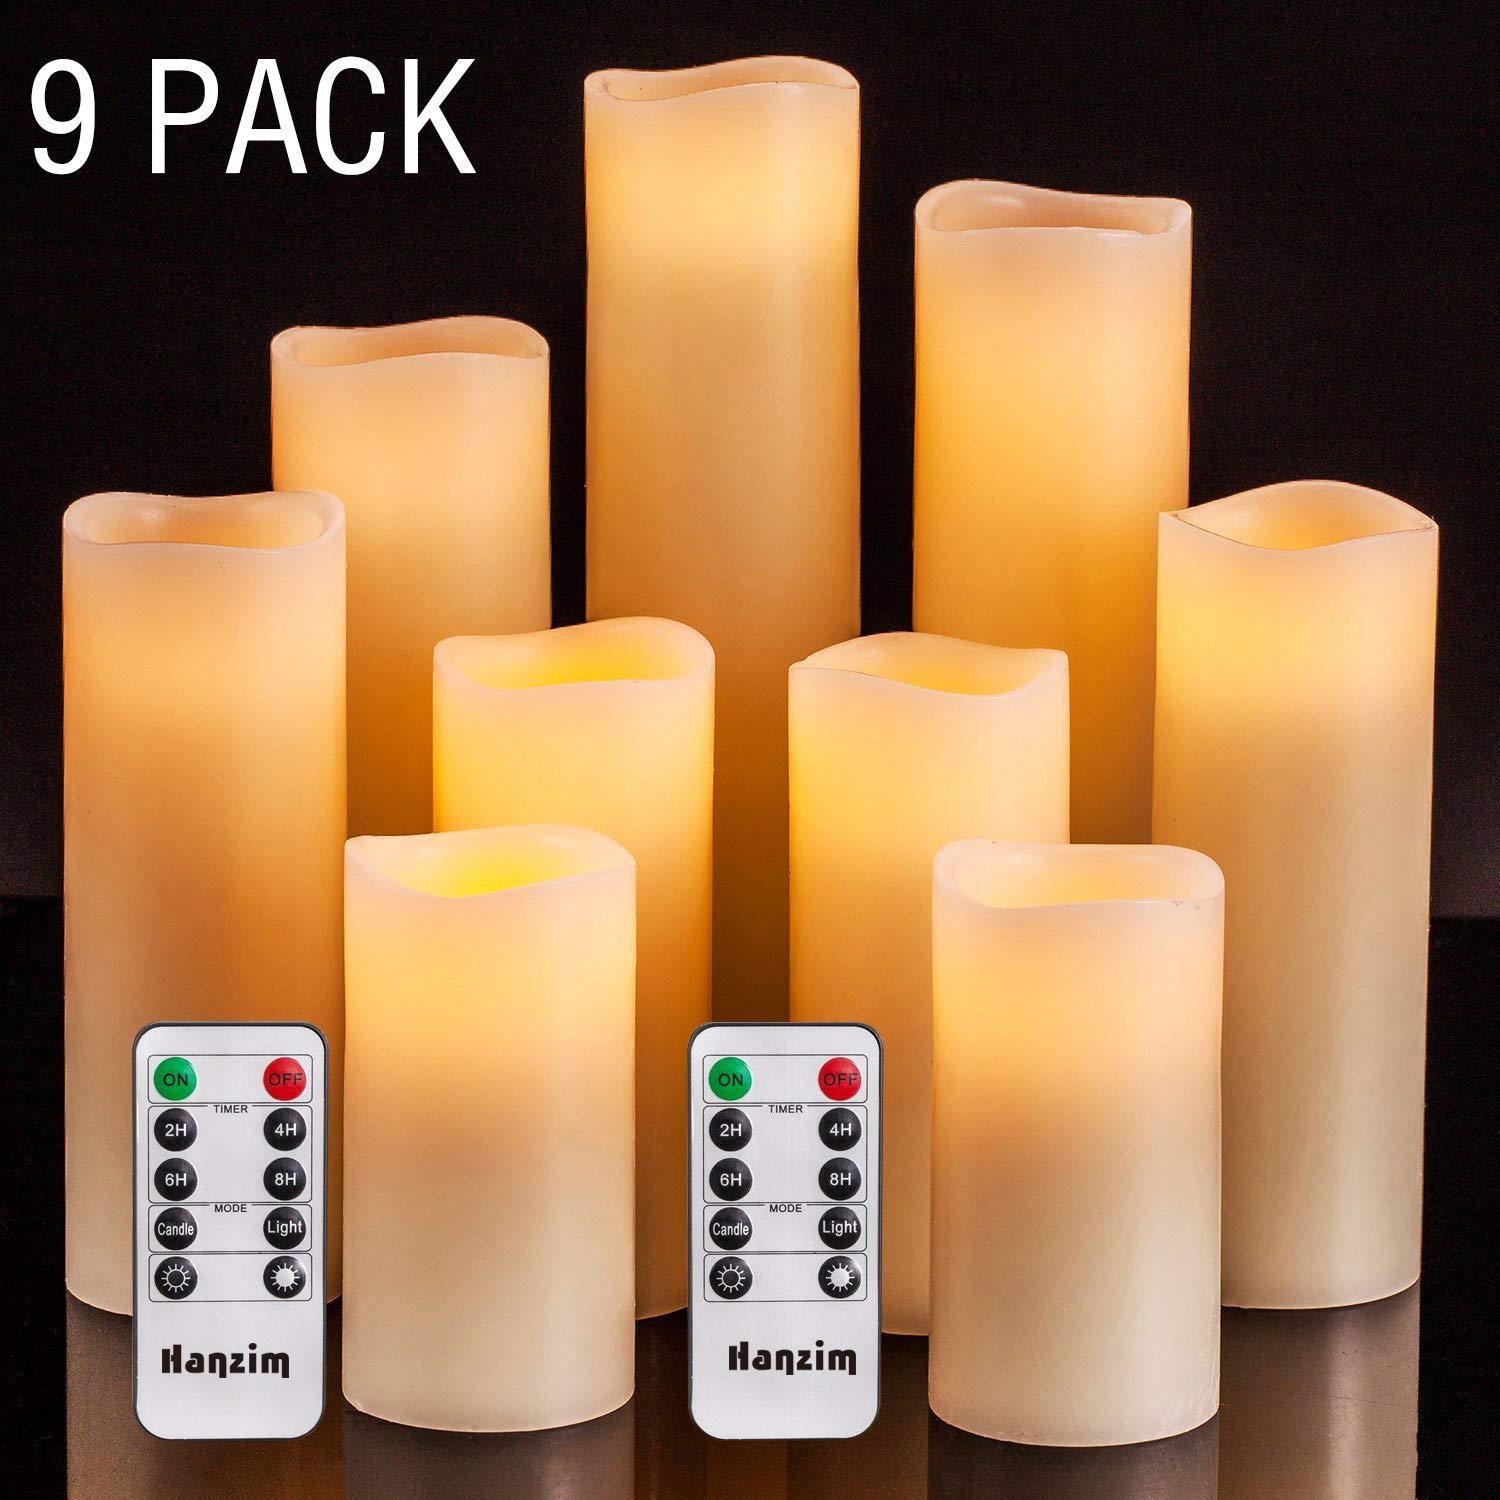 24 Pack of 8 Hour Unscented Clear Tea Light Candles by The Gel Candle Company FREE SHIPPING